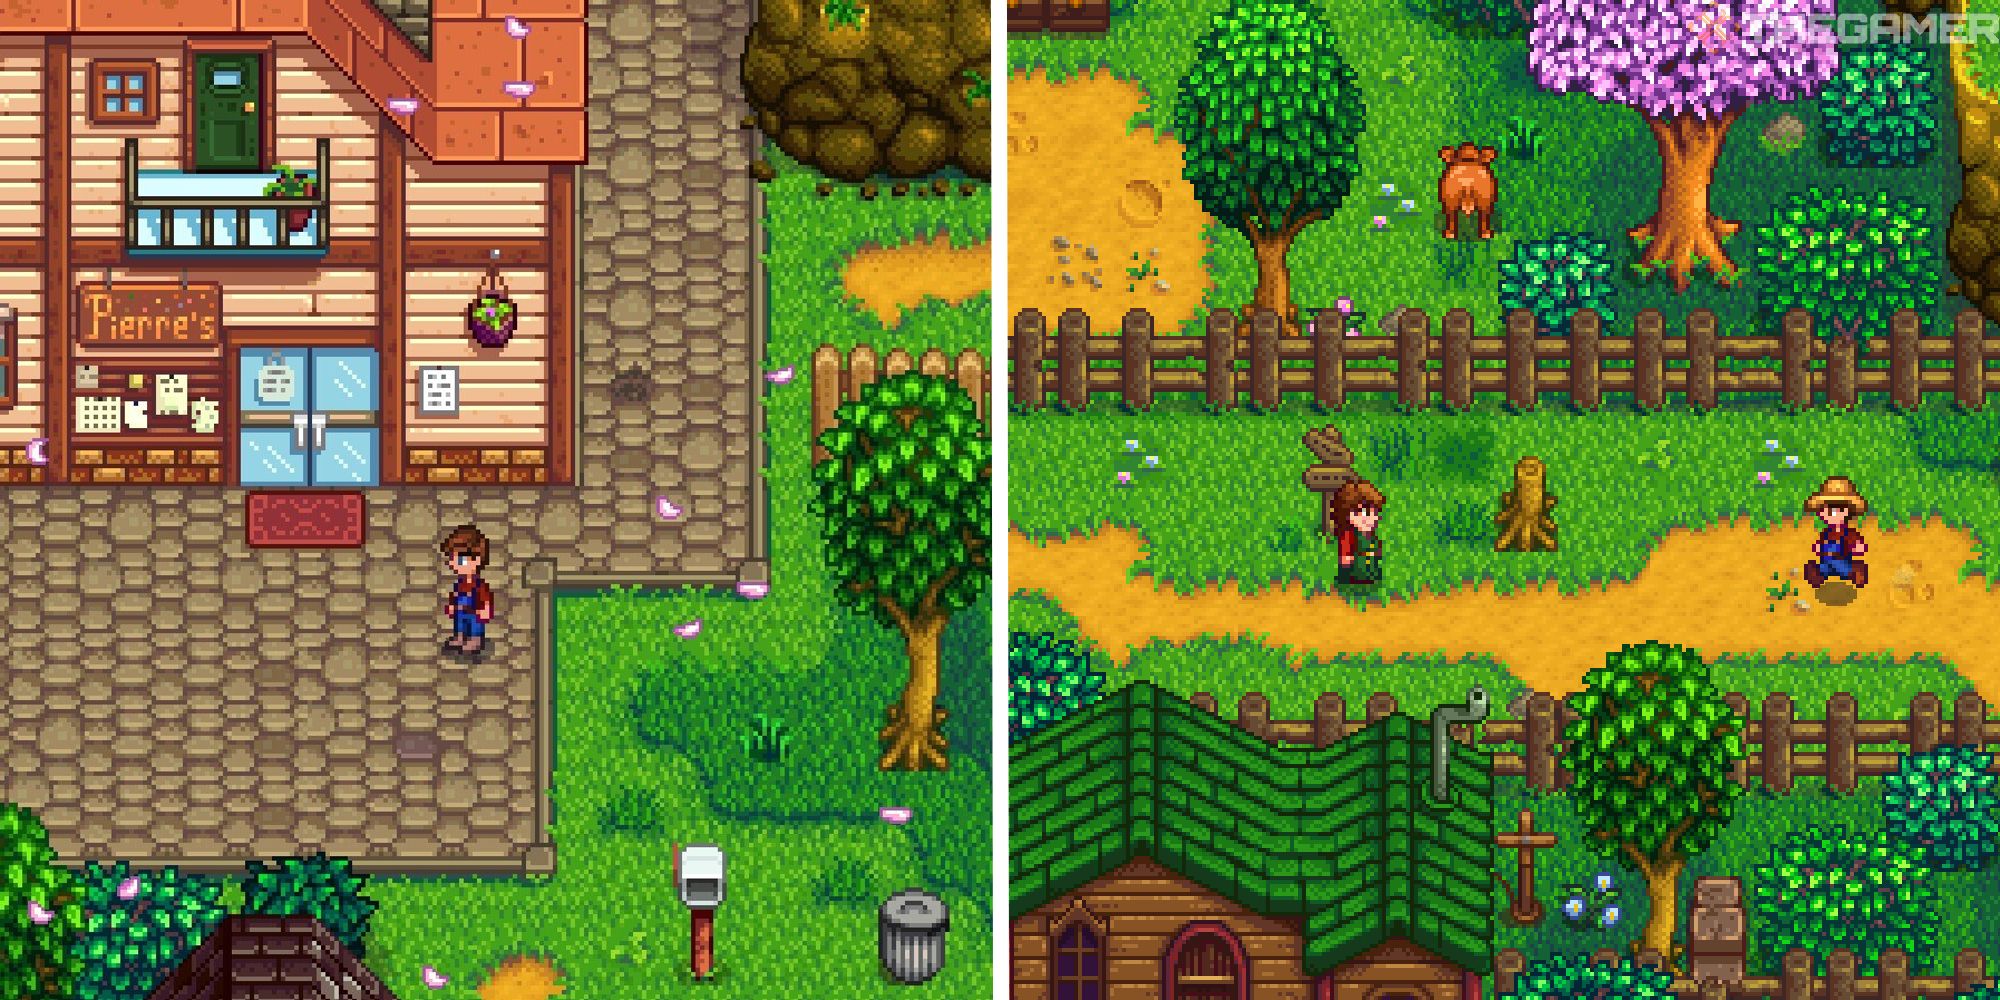 split image showing player outside of general store, next to image of player walking towards marnie